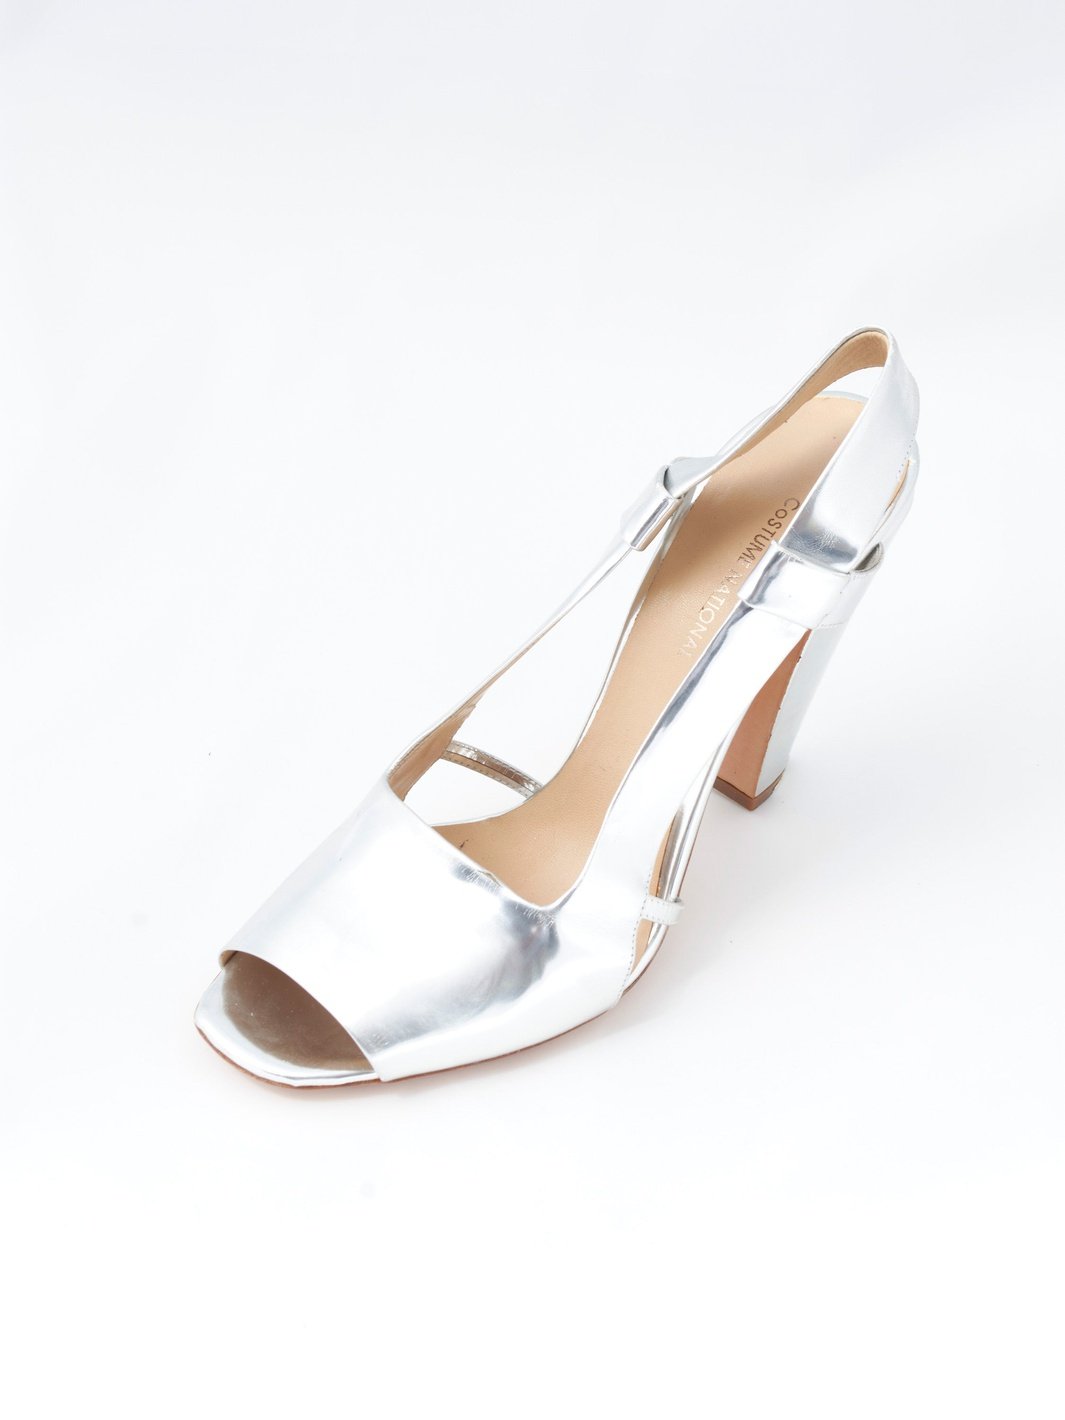 Y2K Costume National sandals in silver patent leather